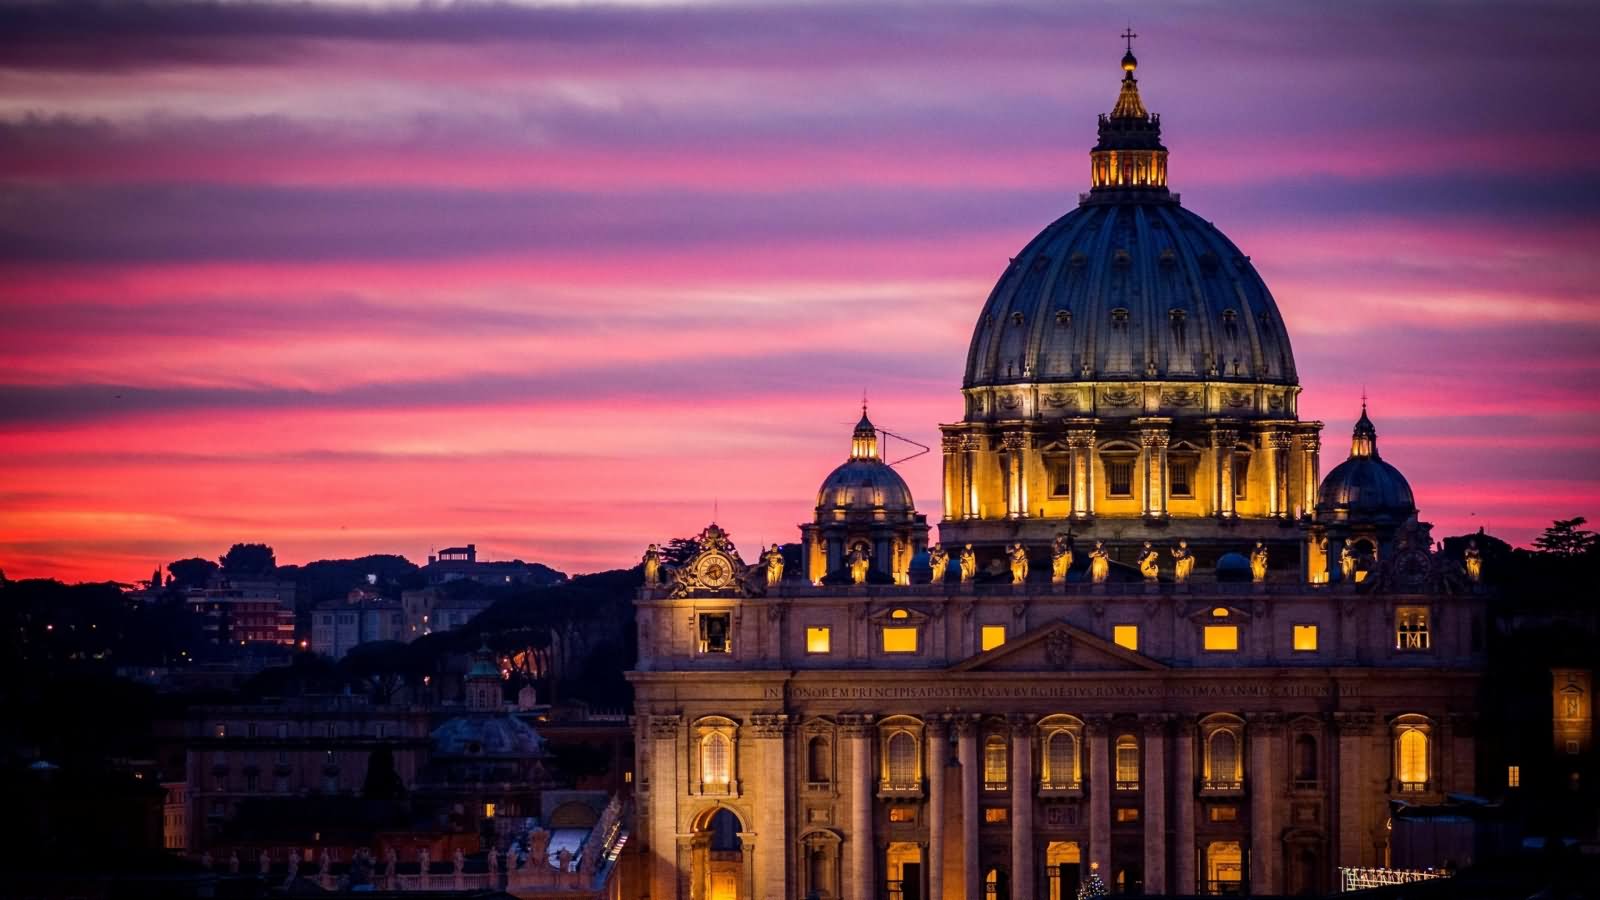 St. Peter's Basilica Vatican City Night View Picture